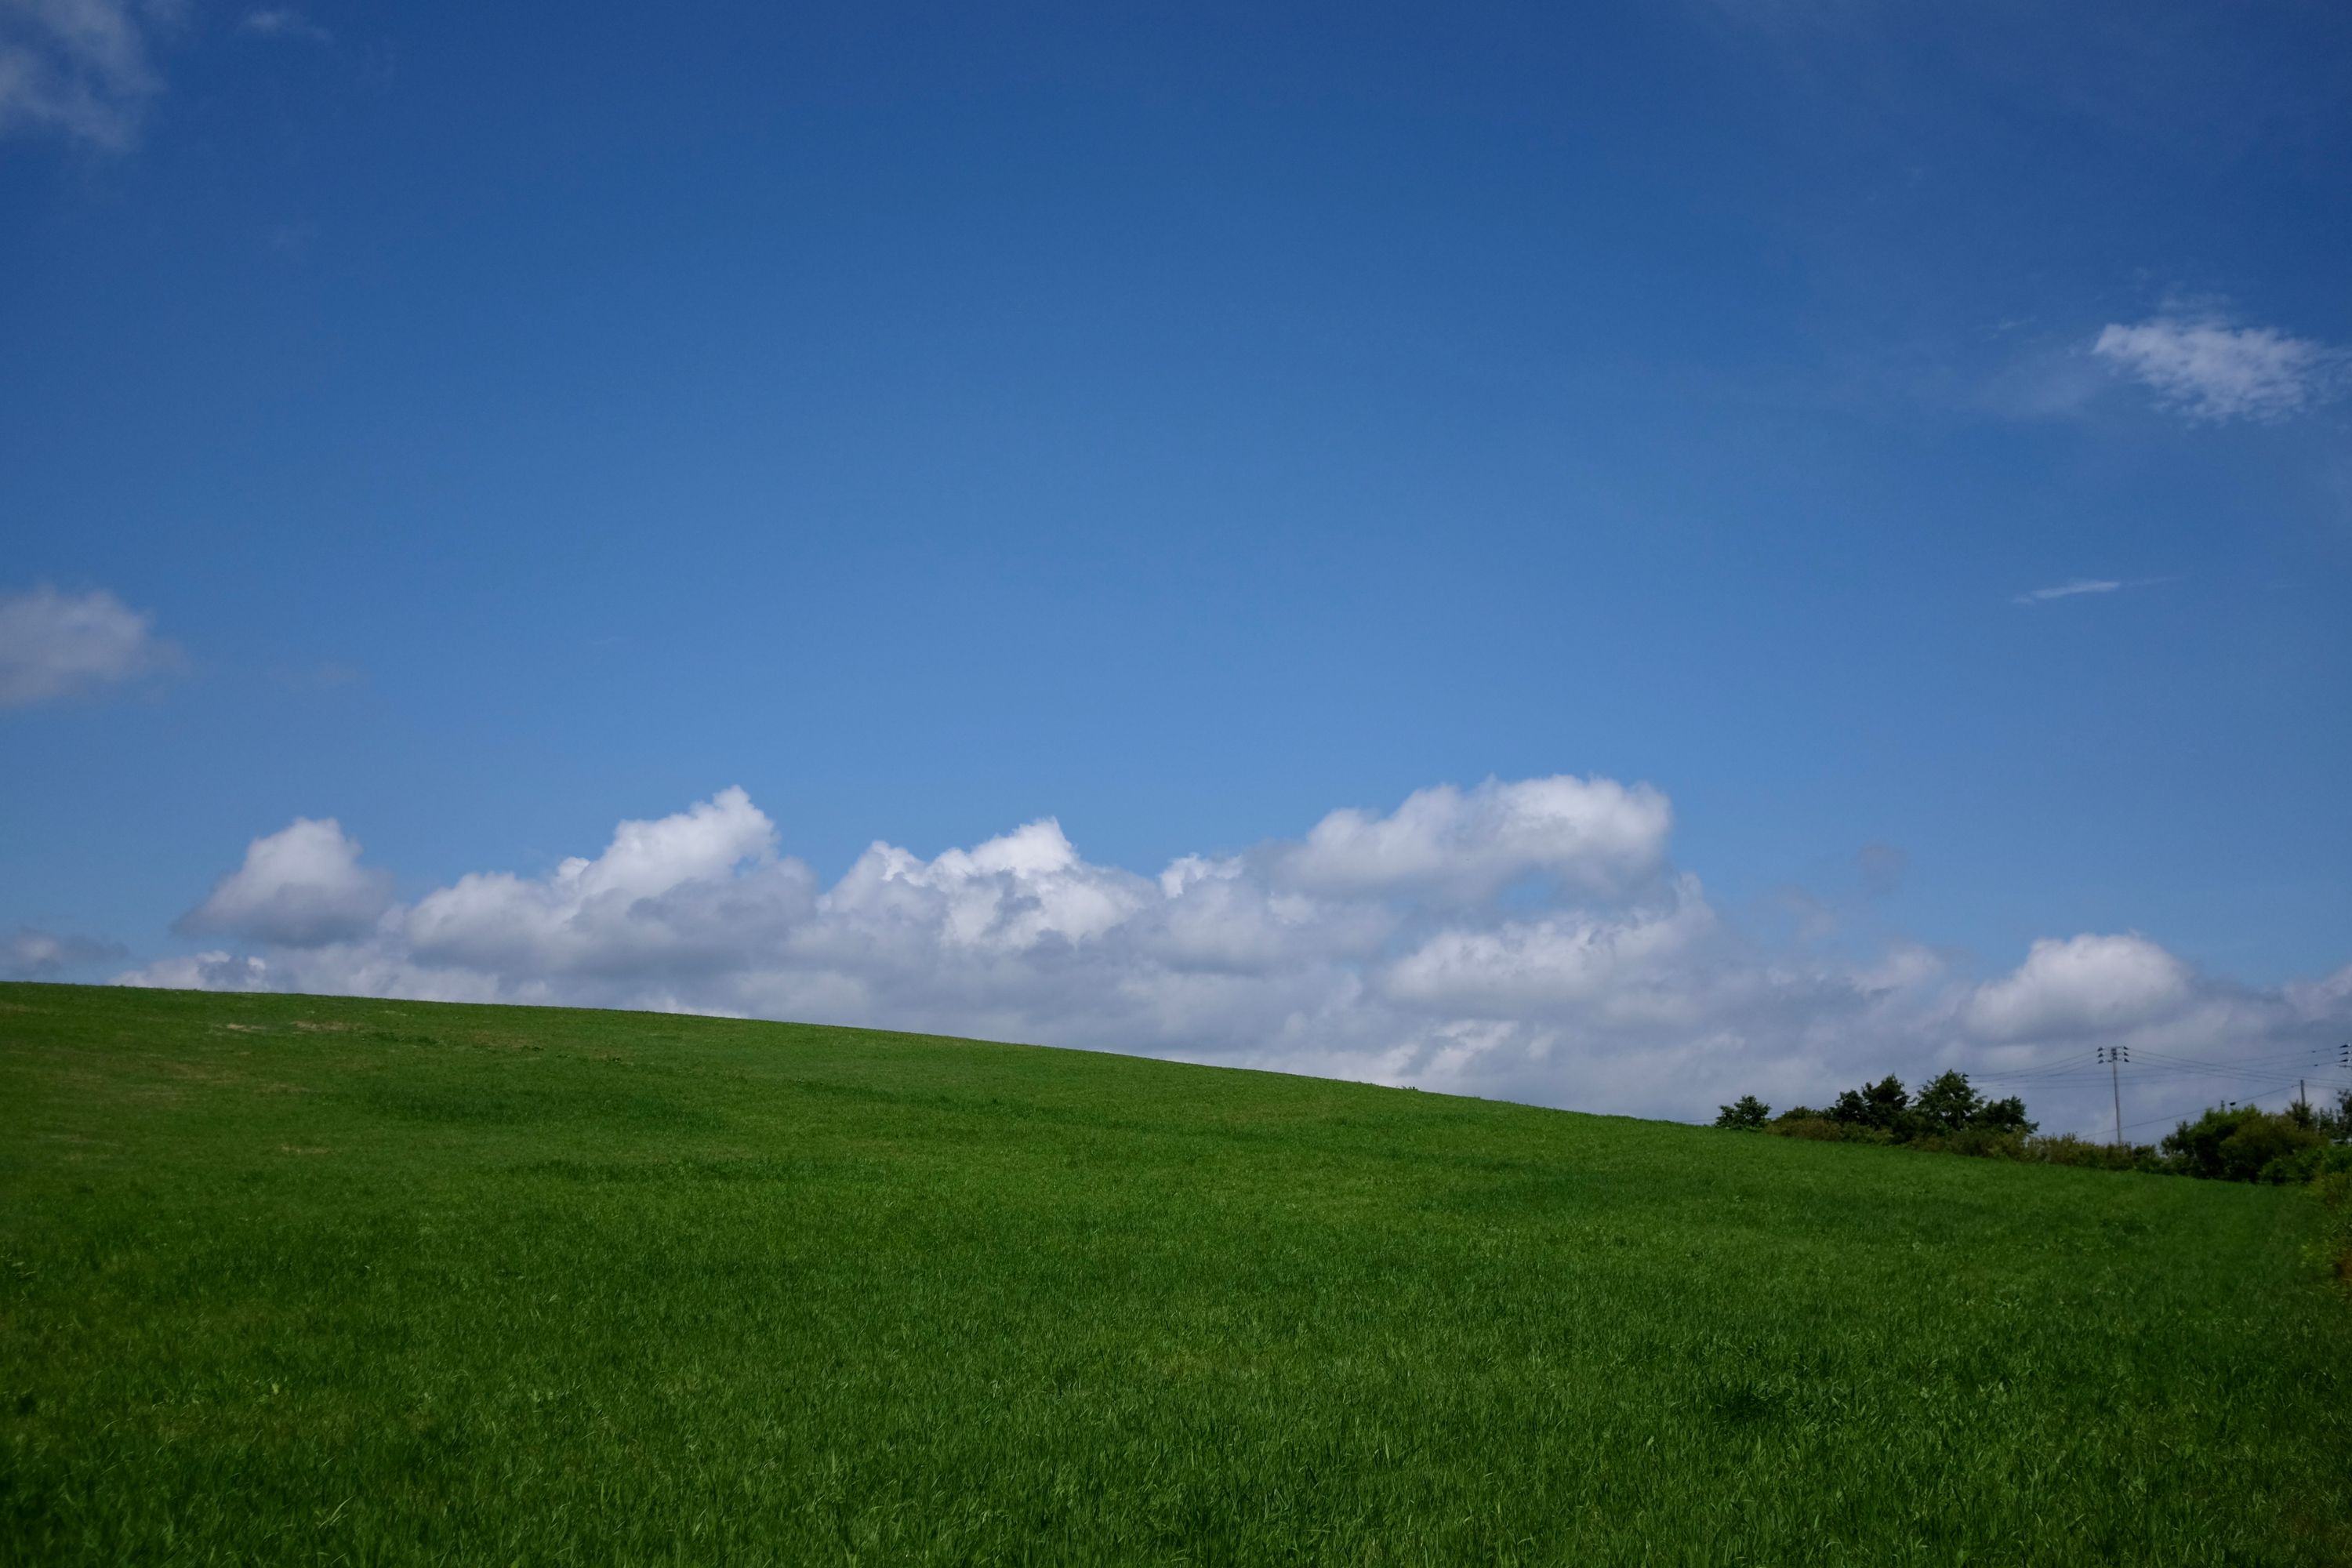 A green field under a blue sky, very closely resembling the classic Windows 95 wallpaper called Bliss.